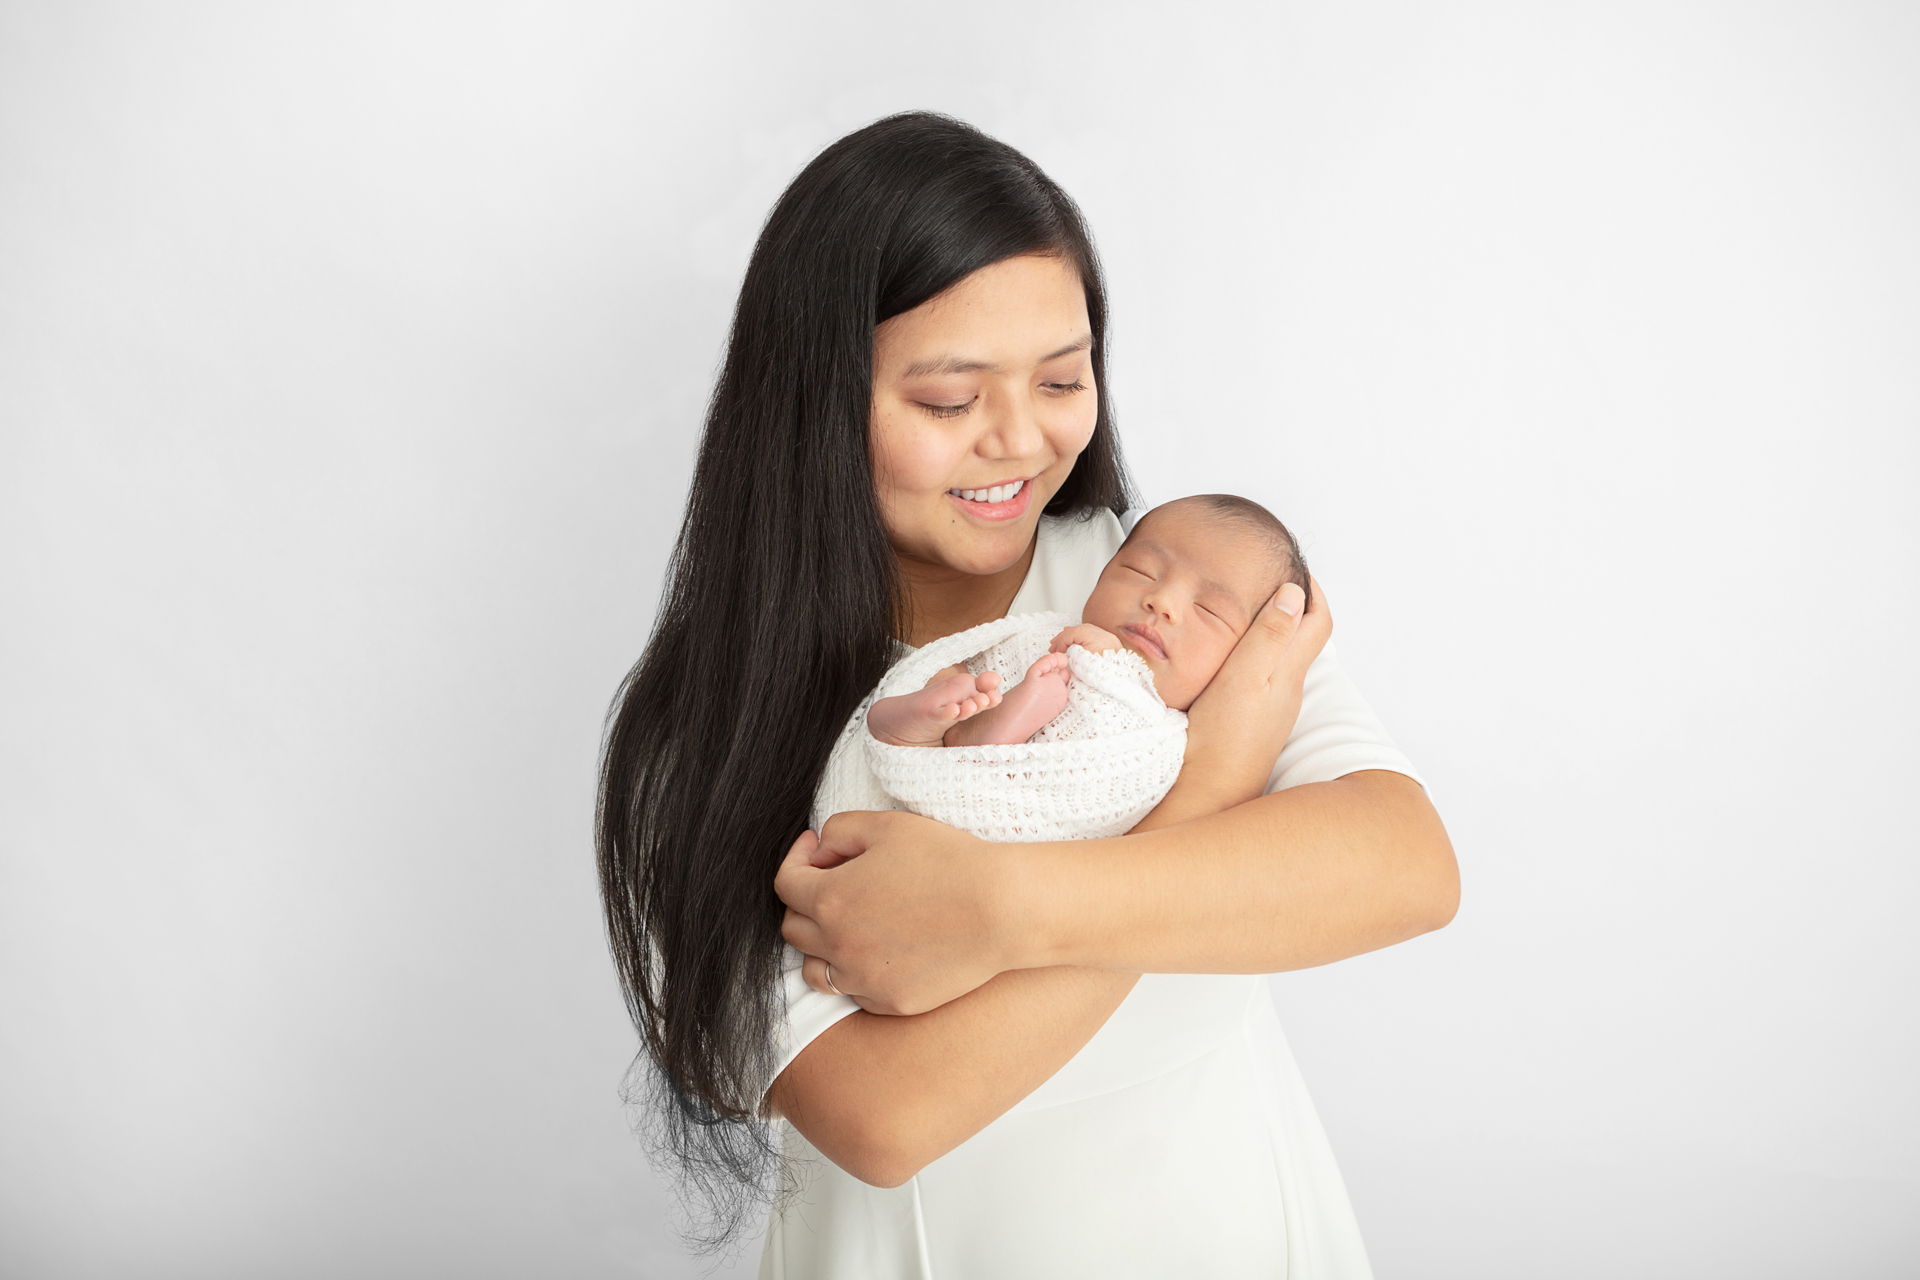 mother with long black hair smiling down at her newborn baby girl who is being cradled in her arms